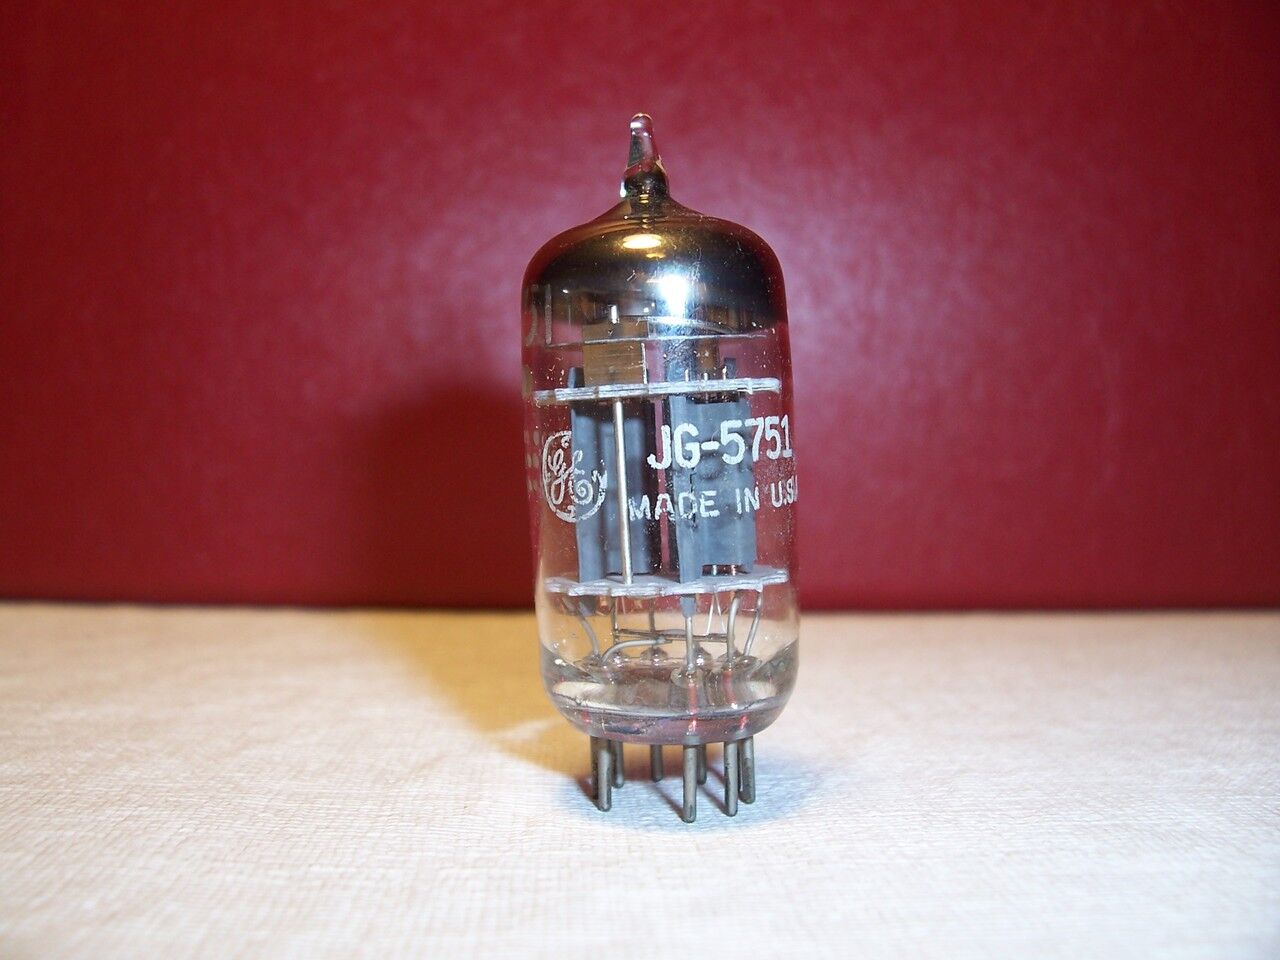 GE 5751 triple mica grey plate - NOS Vacuum Tubes for Sale | Tubes Unlimited